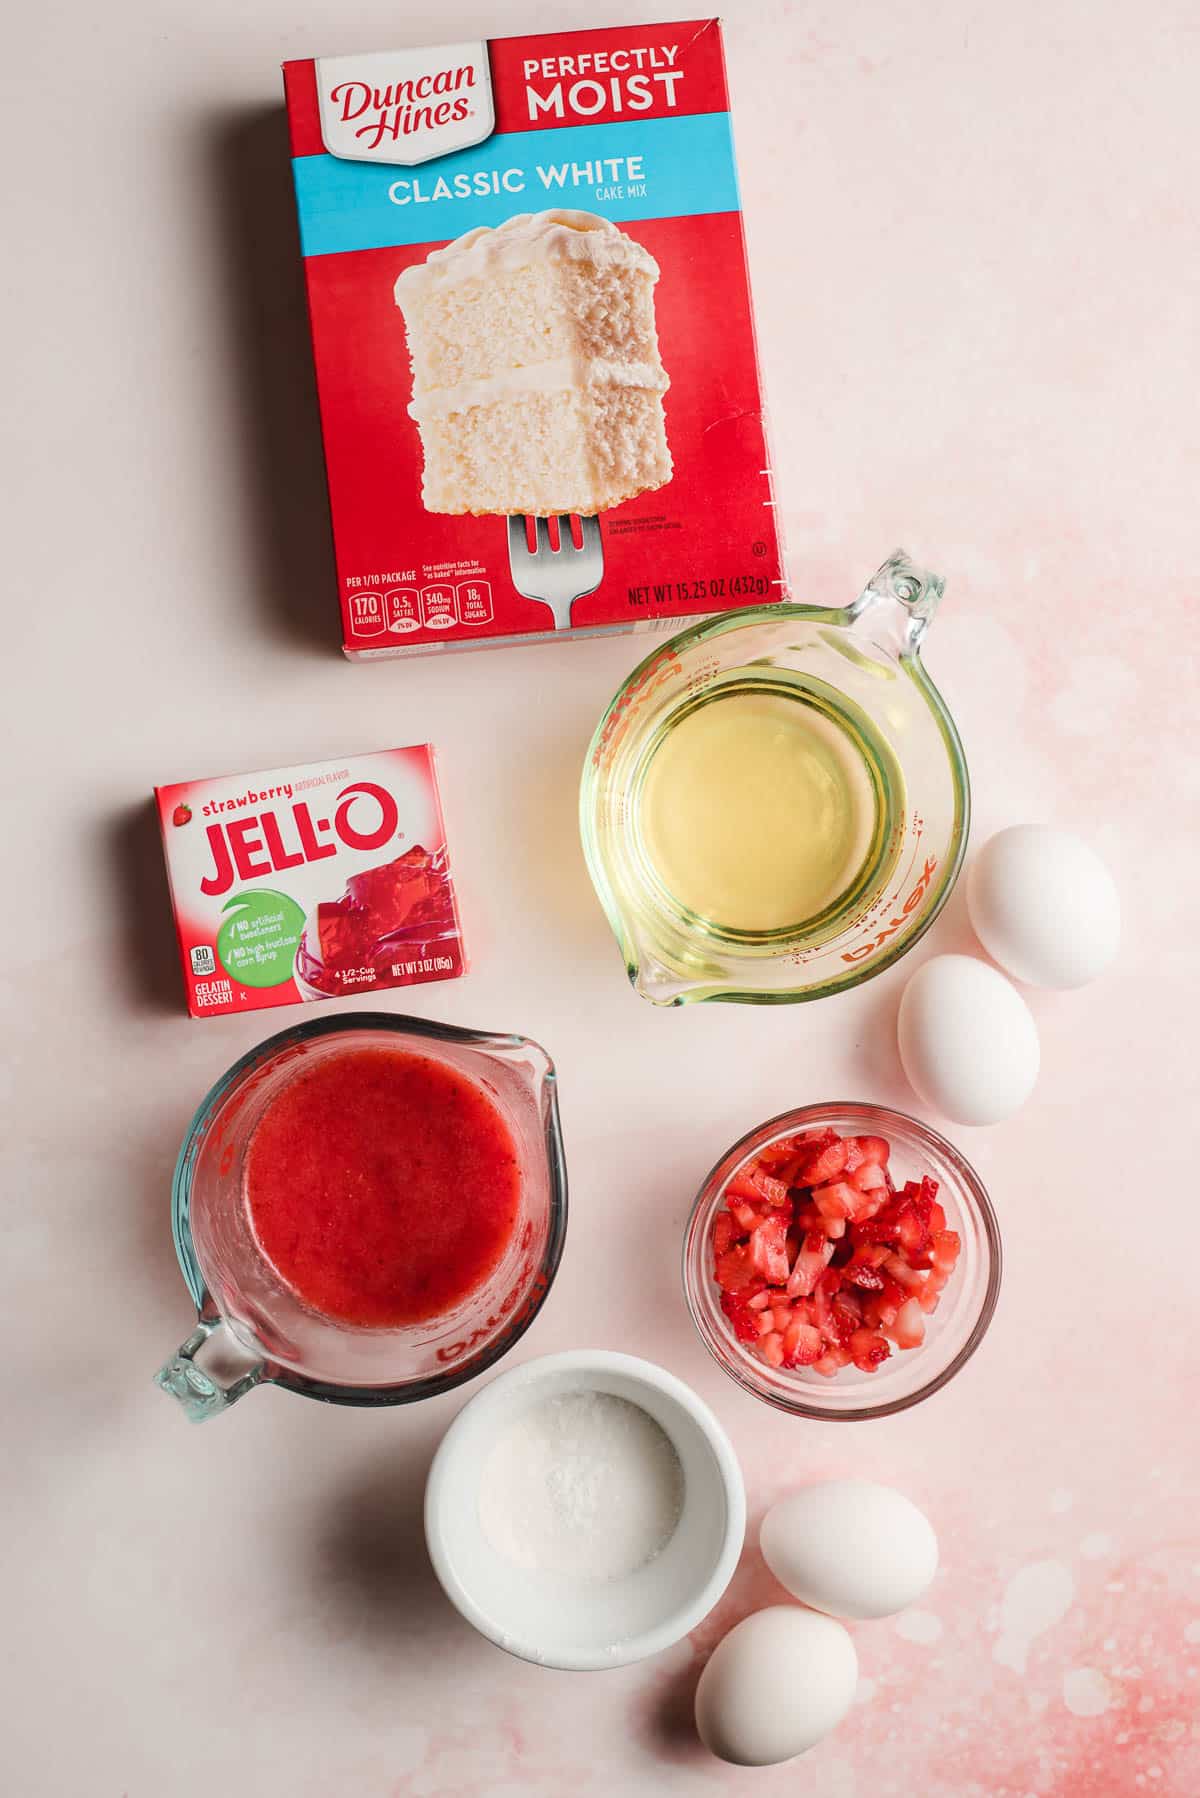 White confection mix, strawberry jello, pureed strawberries, eggs, oil, flour, and diced strawberries on a pink background.